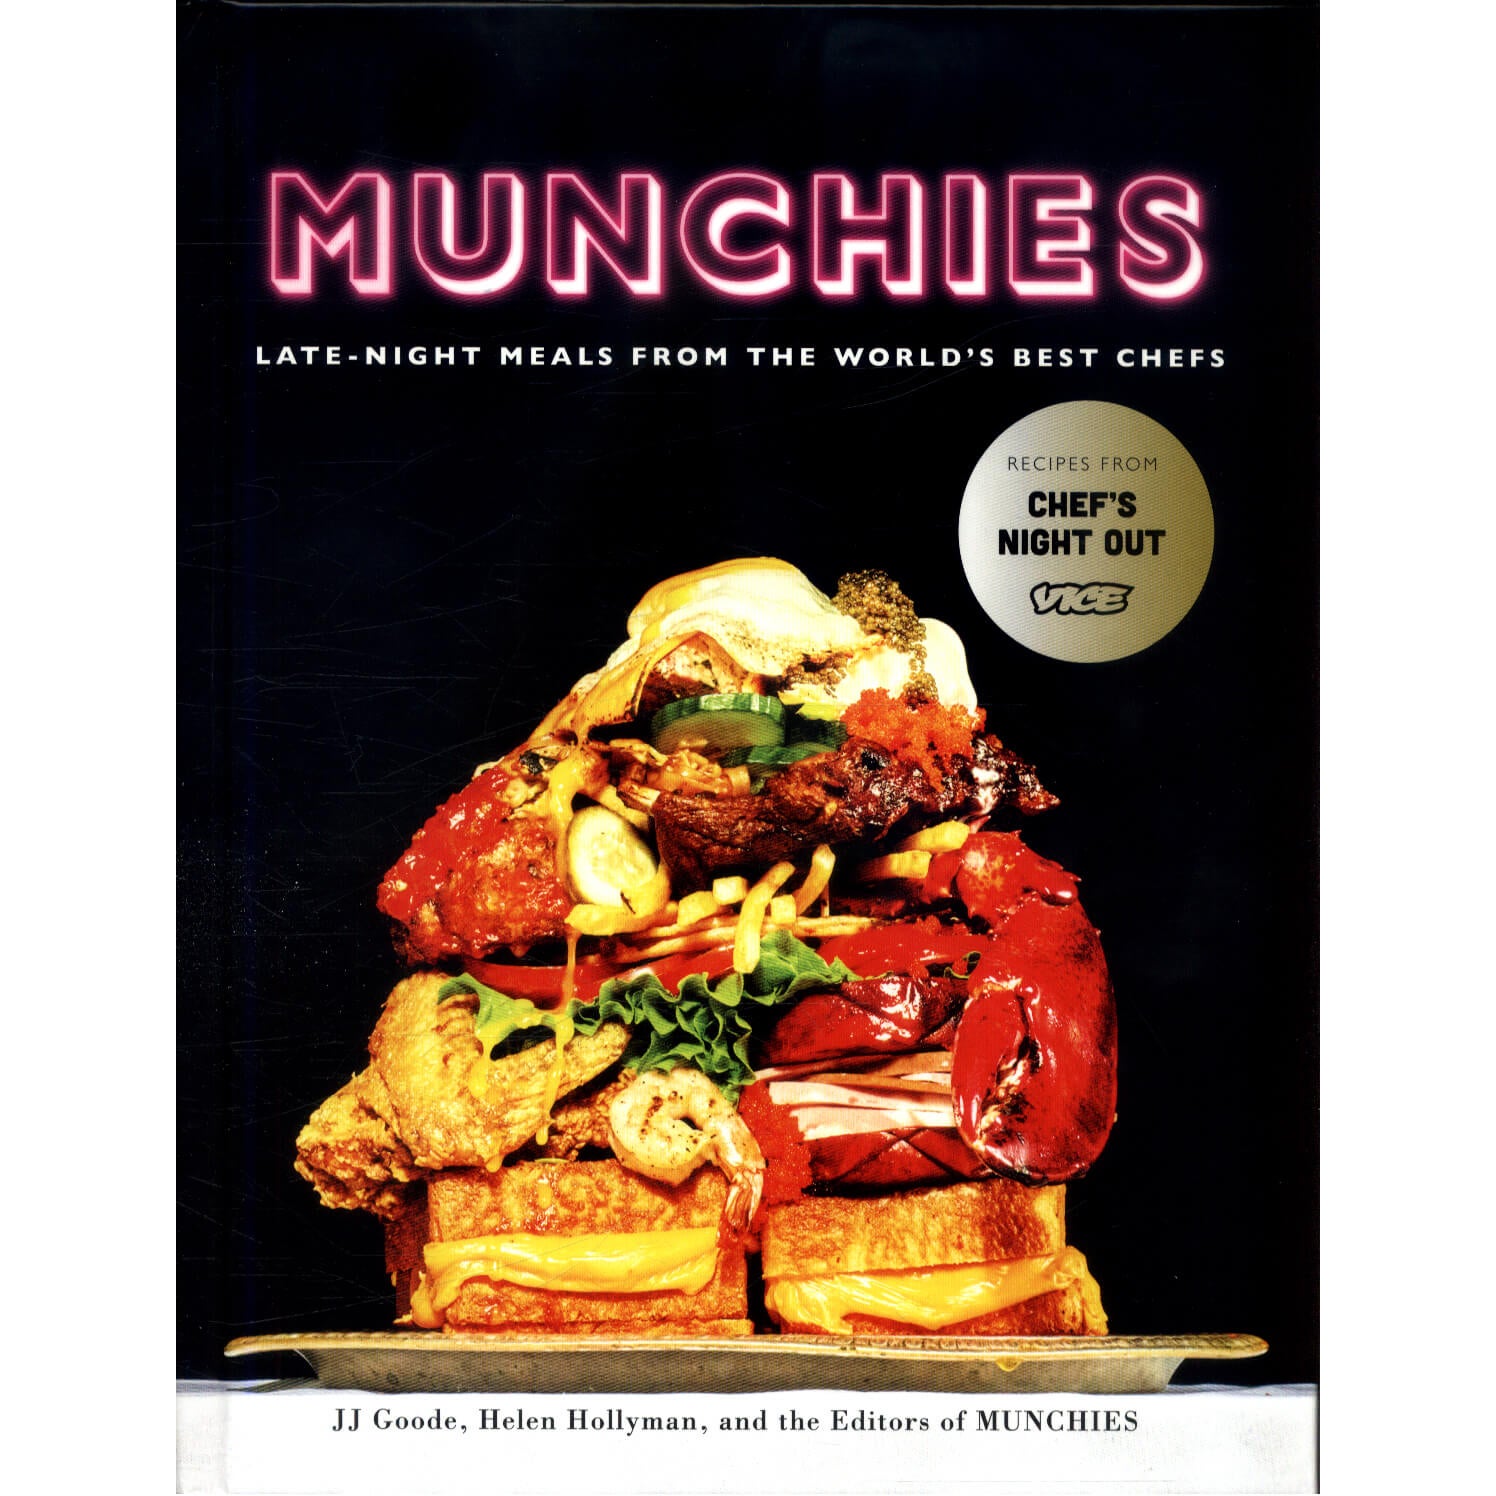 Munchies: Late-Night Meals from the World's Best Chefs (Hardback)